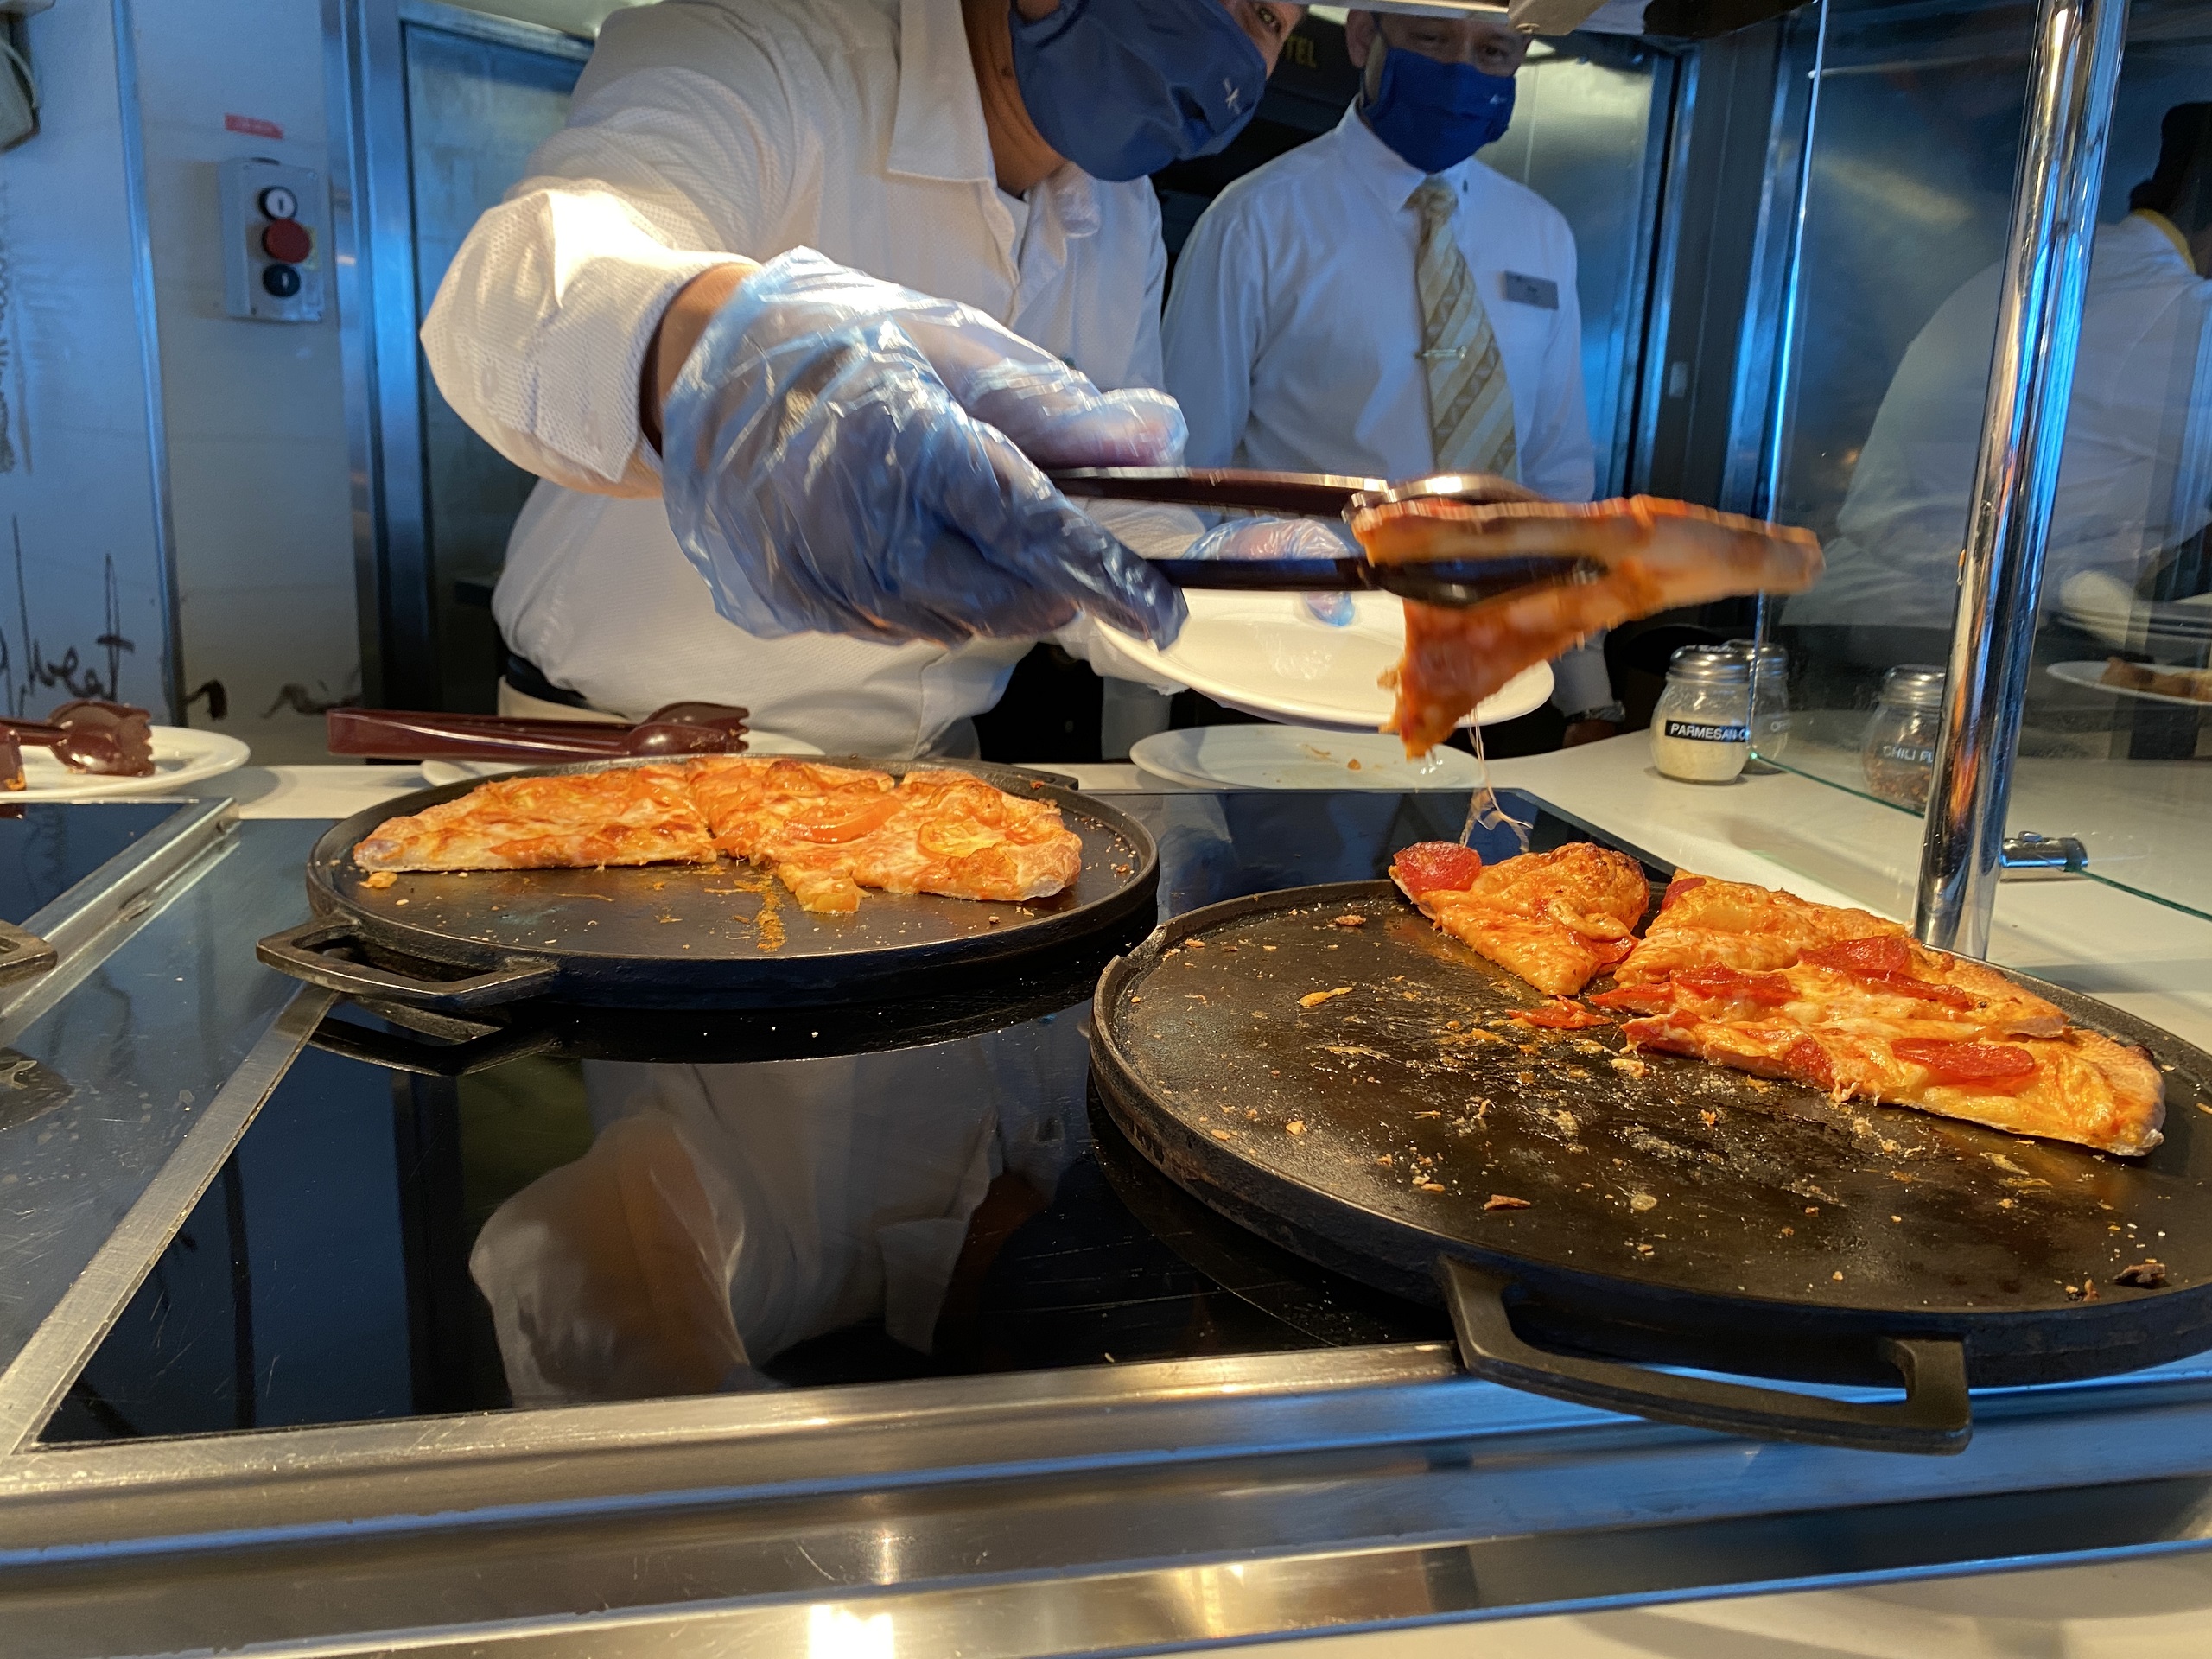 A crewmember holds a slice of pizza that's ready to be served to a passenger on Celebrity Millennium.